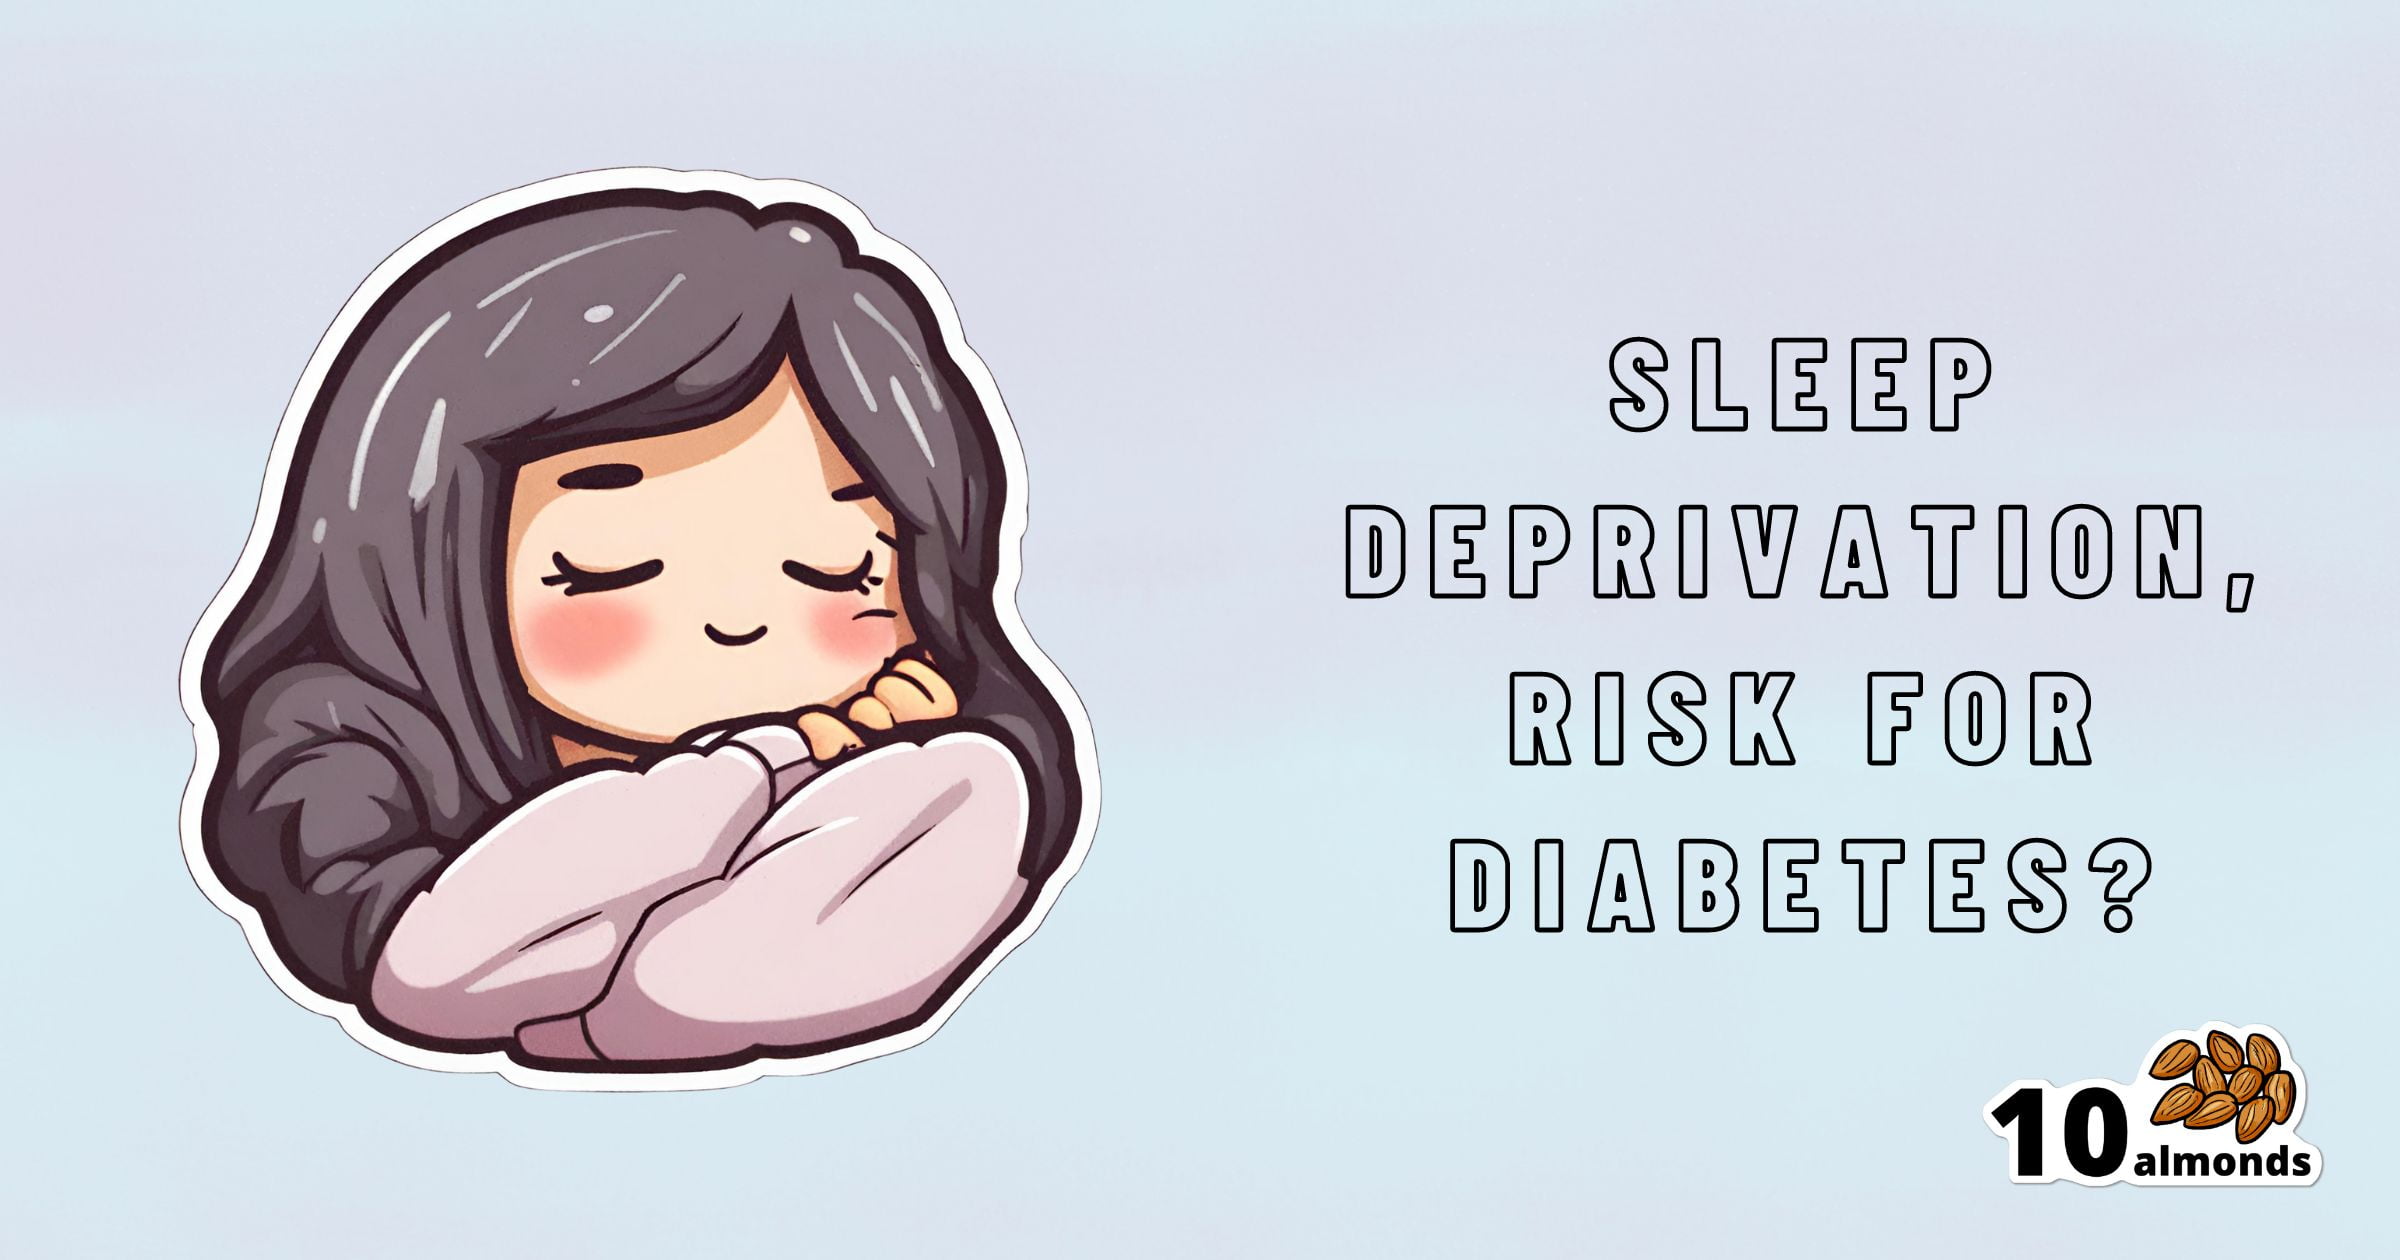 Illustration of a sleeping person with long hair and closed eyes, surrounded by pillows. Text on the right reads, "Lack of sleep, risk for type 2 diabetes?" and "10 almonds" with a small image of almonds beside the text. Background is light blue.